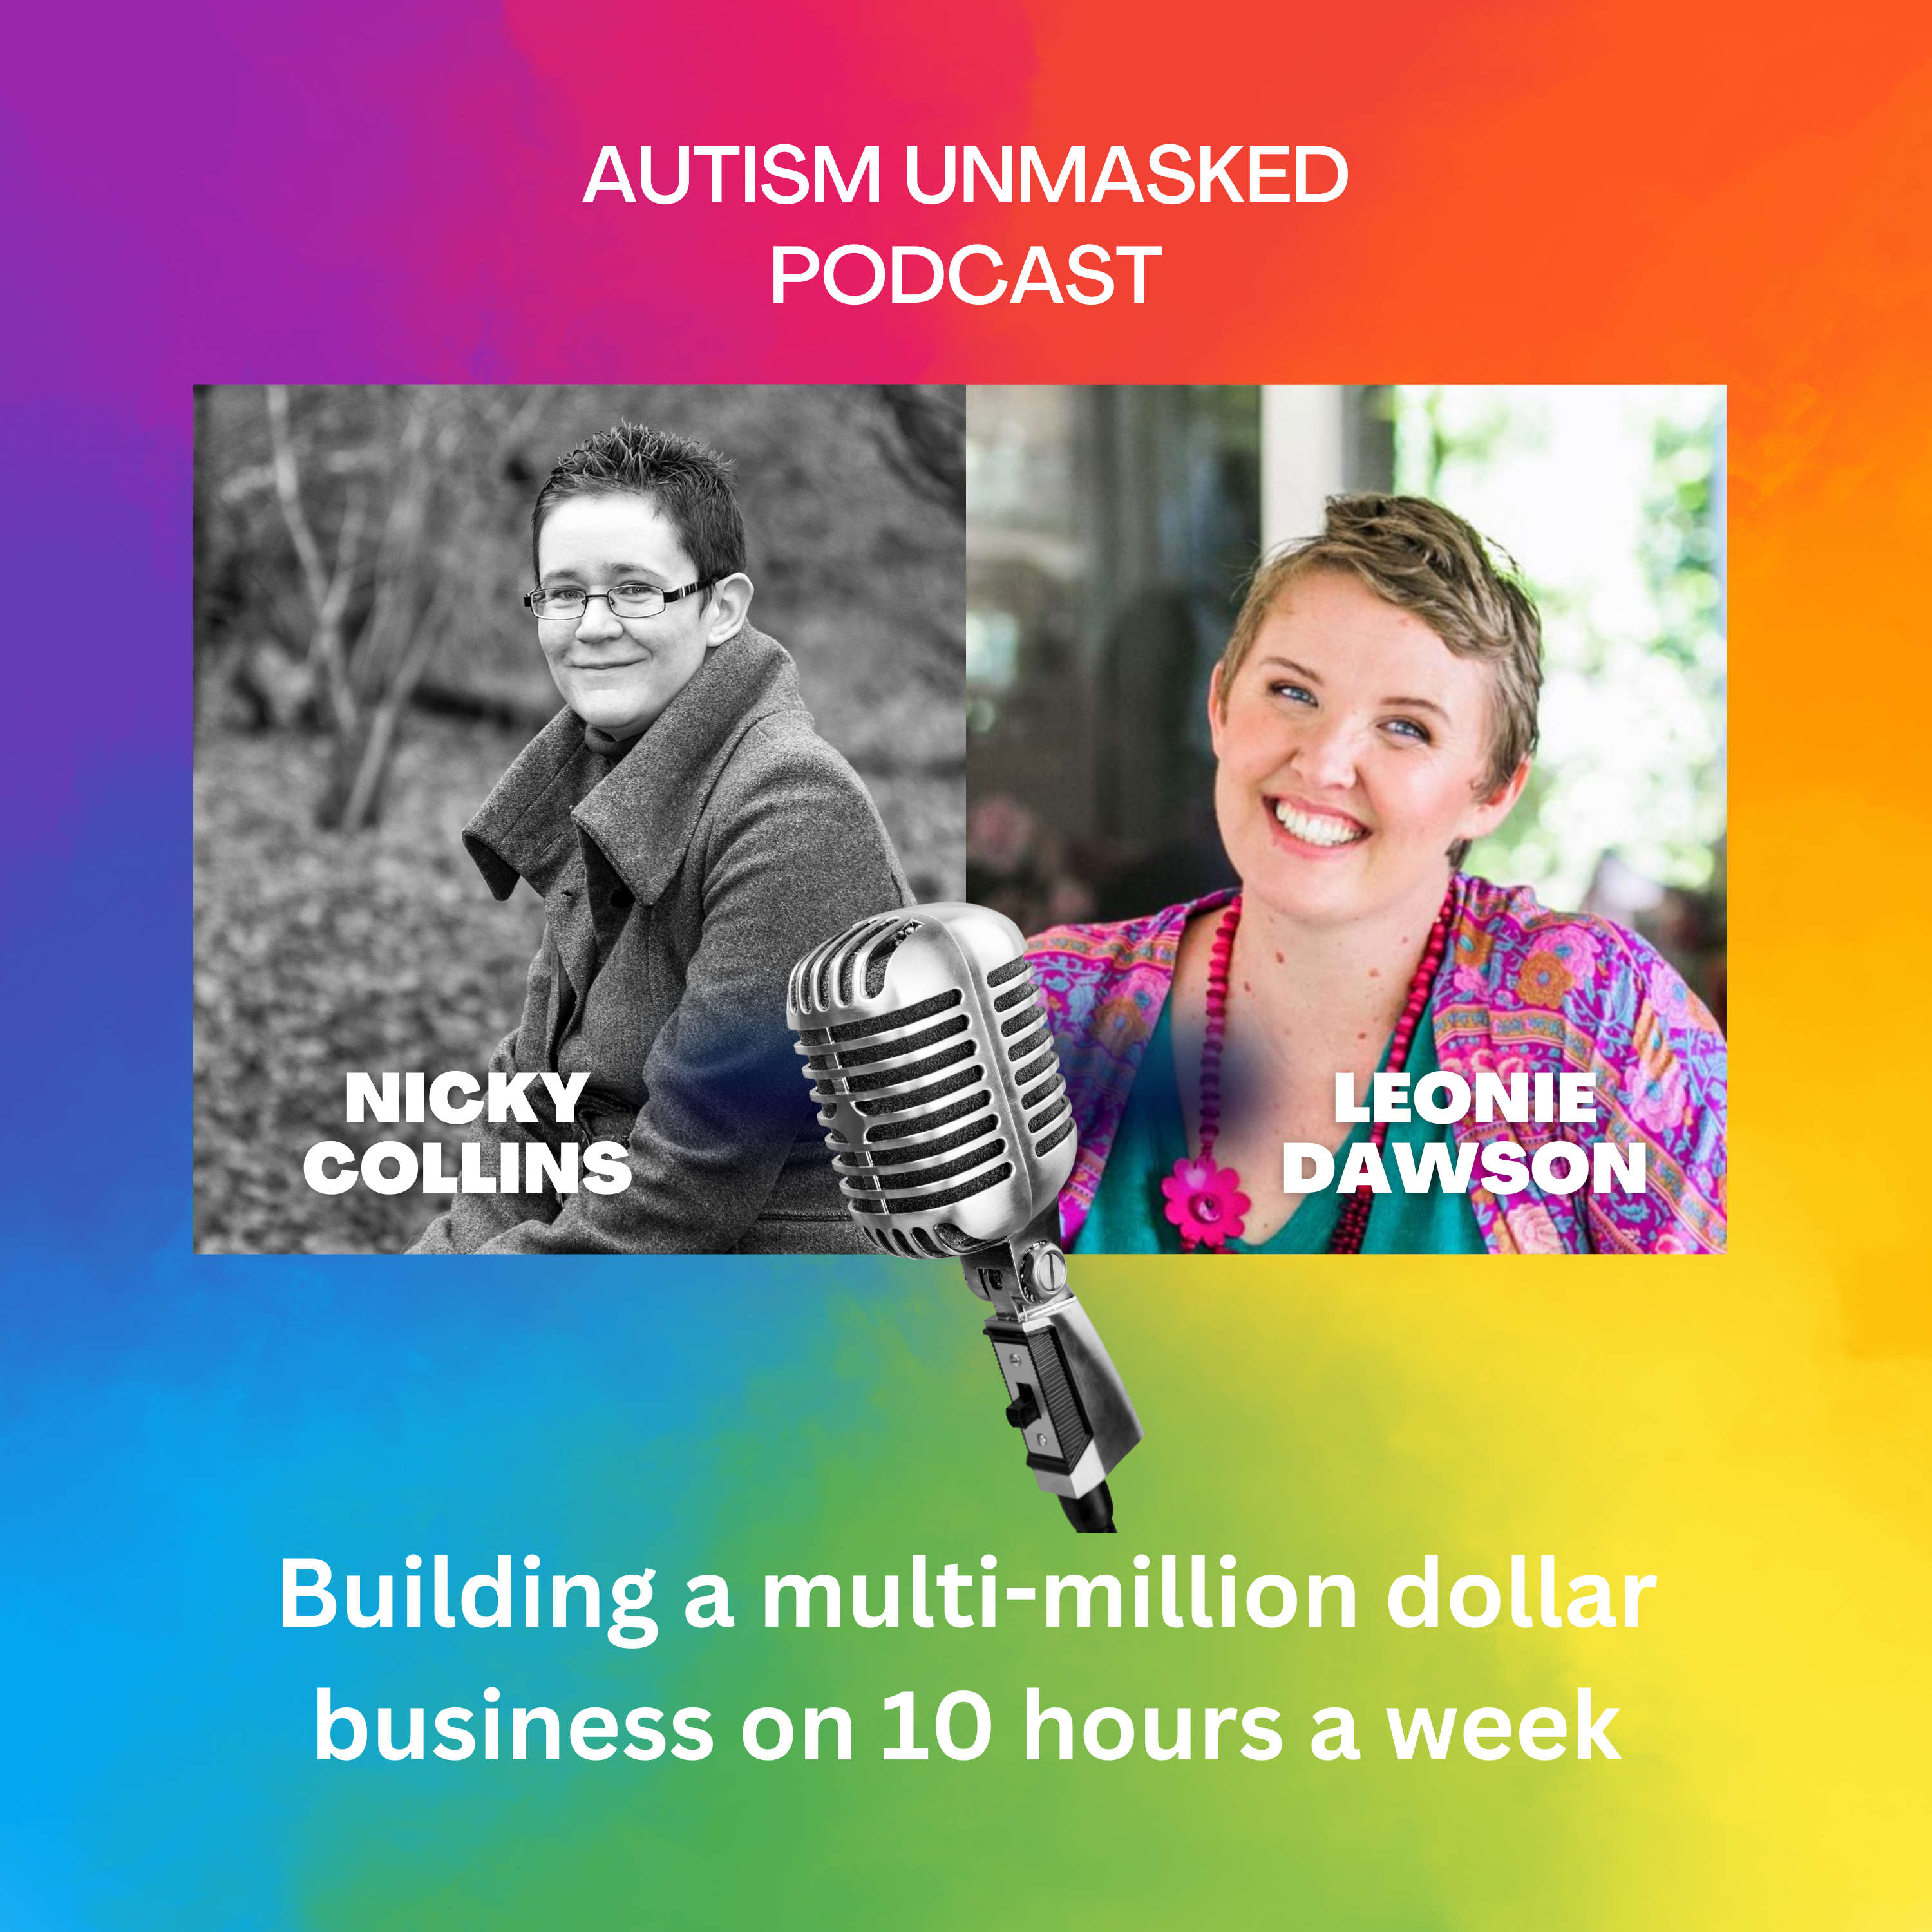 The Autism Unmasked Podcast